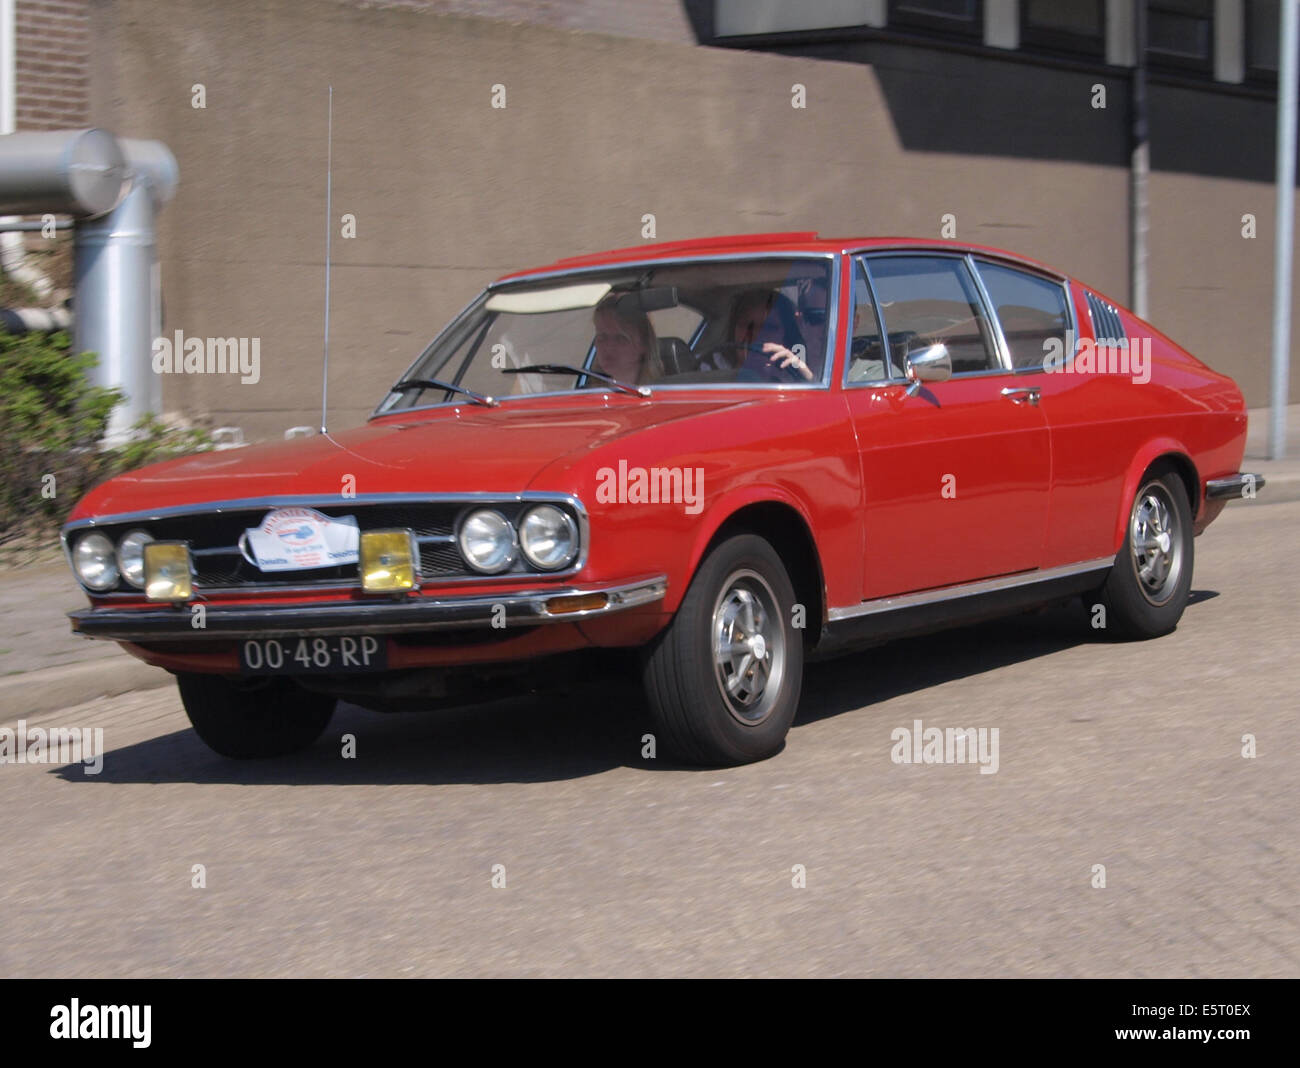 Audi 100 Coupe S, build in 1977, Dutch licence registration 00-48-RP, at IJmuiden, The Netherlands, pic5 Stock Photo